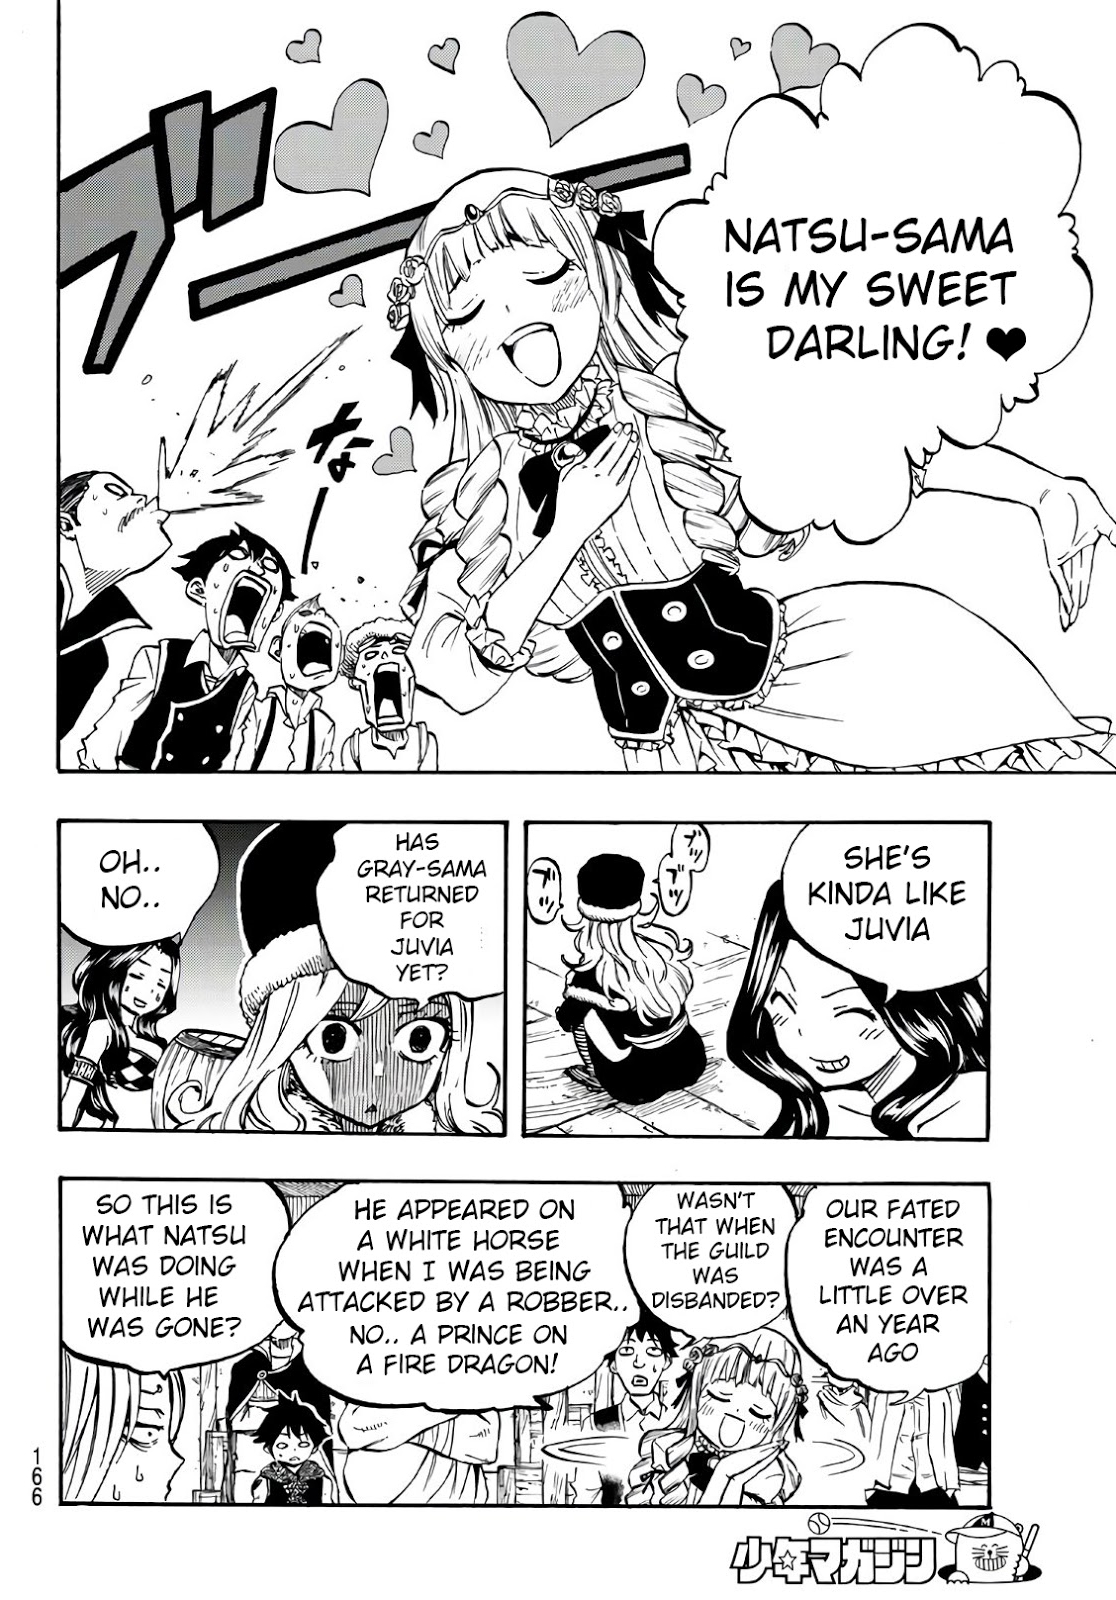 Fairy Tail: 100 Years Quest Ch. 1